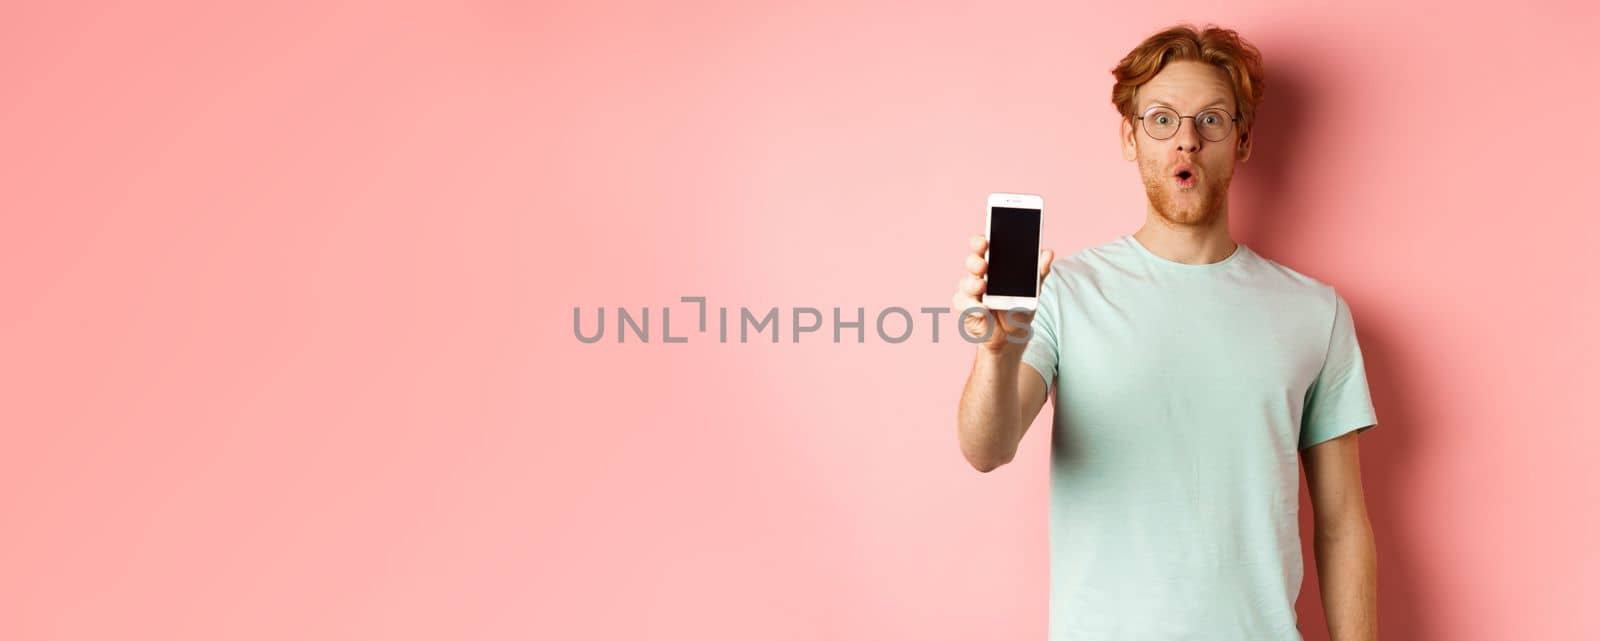 Image of handsome guy with red hair, wearing glasses and t-shirt, saying wow and showing smartphone screen, standing against pink background.